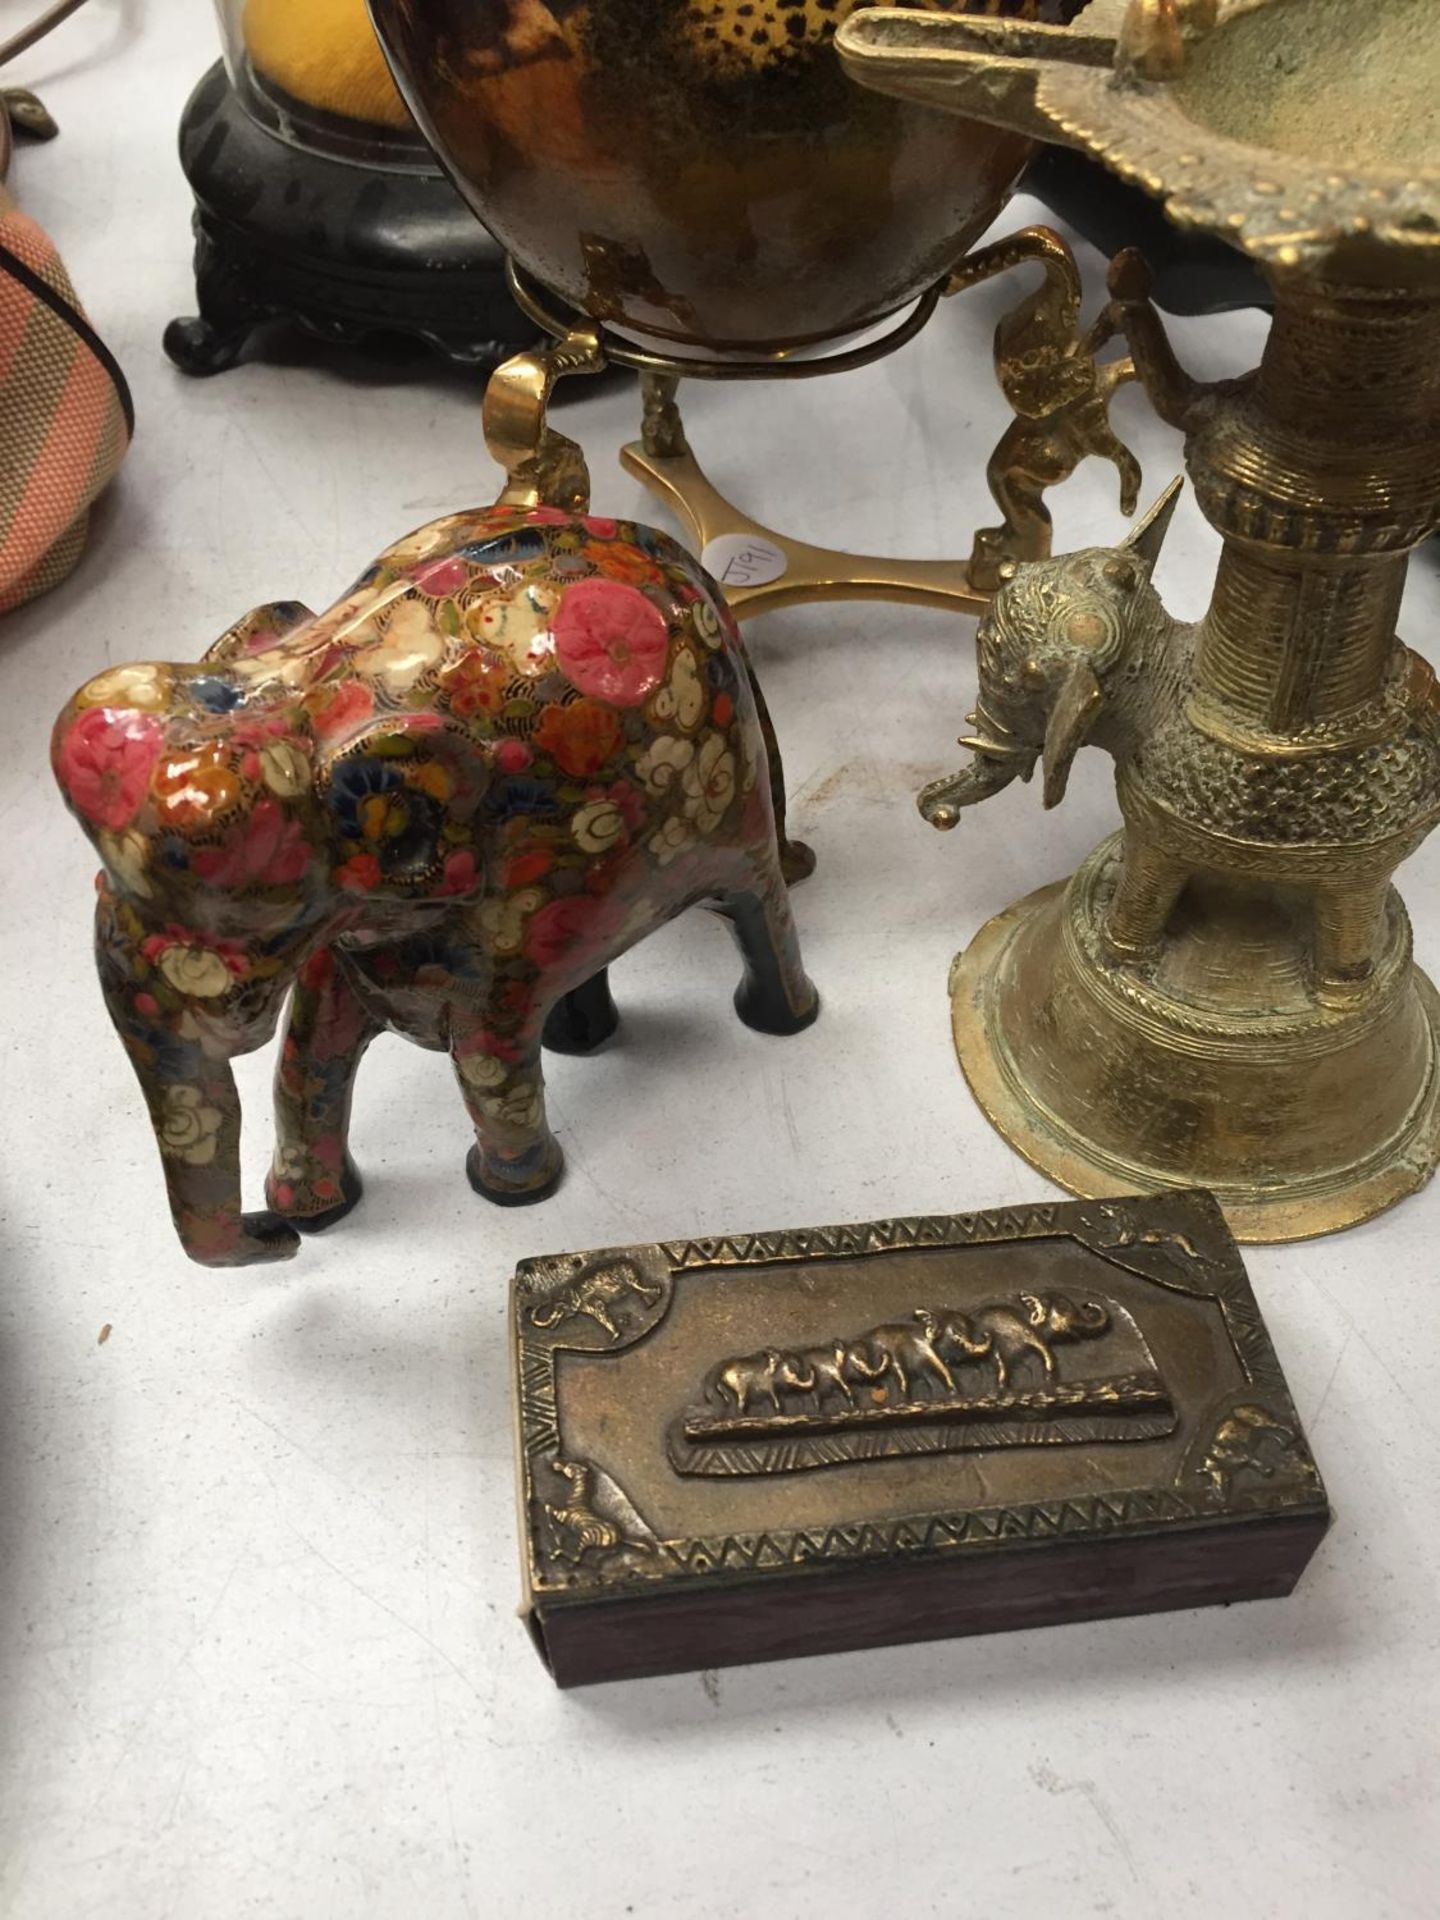 FOUR ITEMS OF DECORATIVE ELPHANT COLLECTABLES TO INCLUDE A MATCH BOX HOLDER - Image 7 of 8